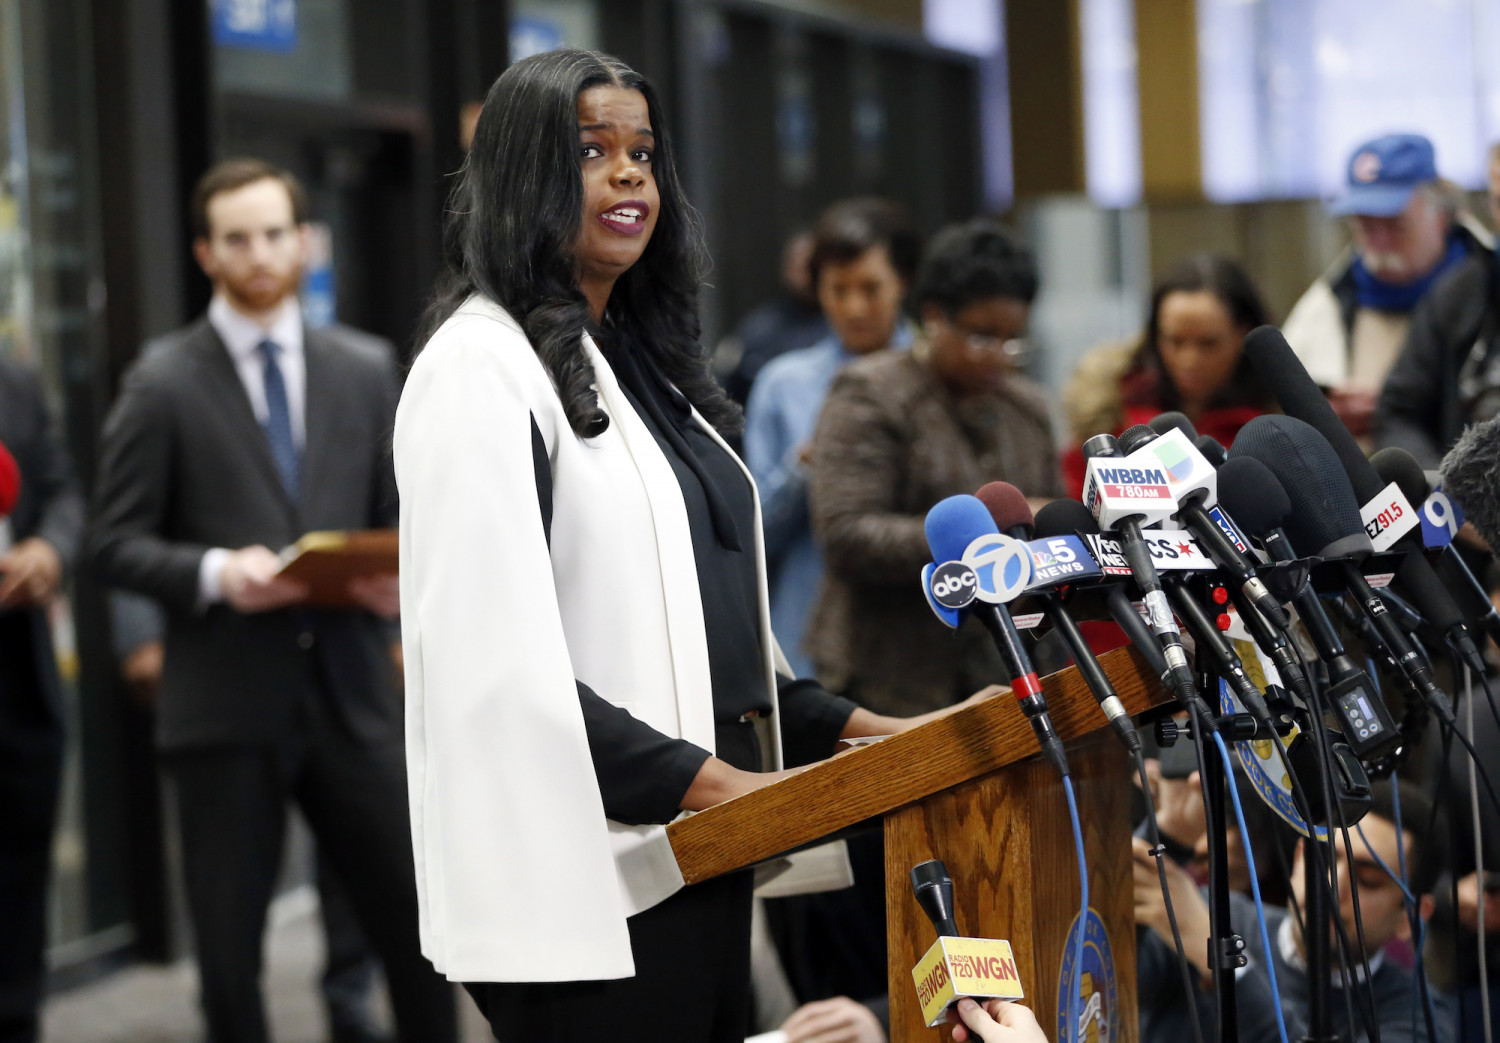 A Top Chicago Prosecutor Faces a Huge Backlog as Staff Leave in Droves